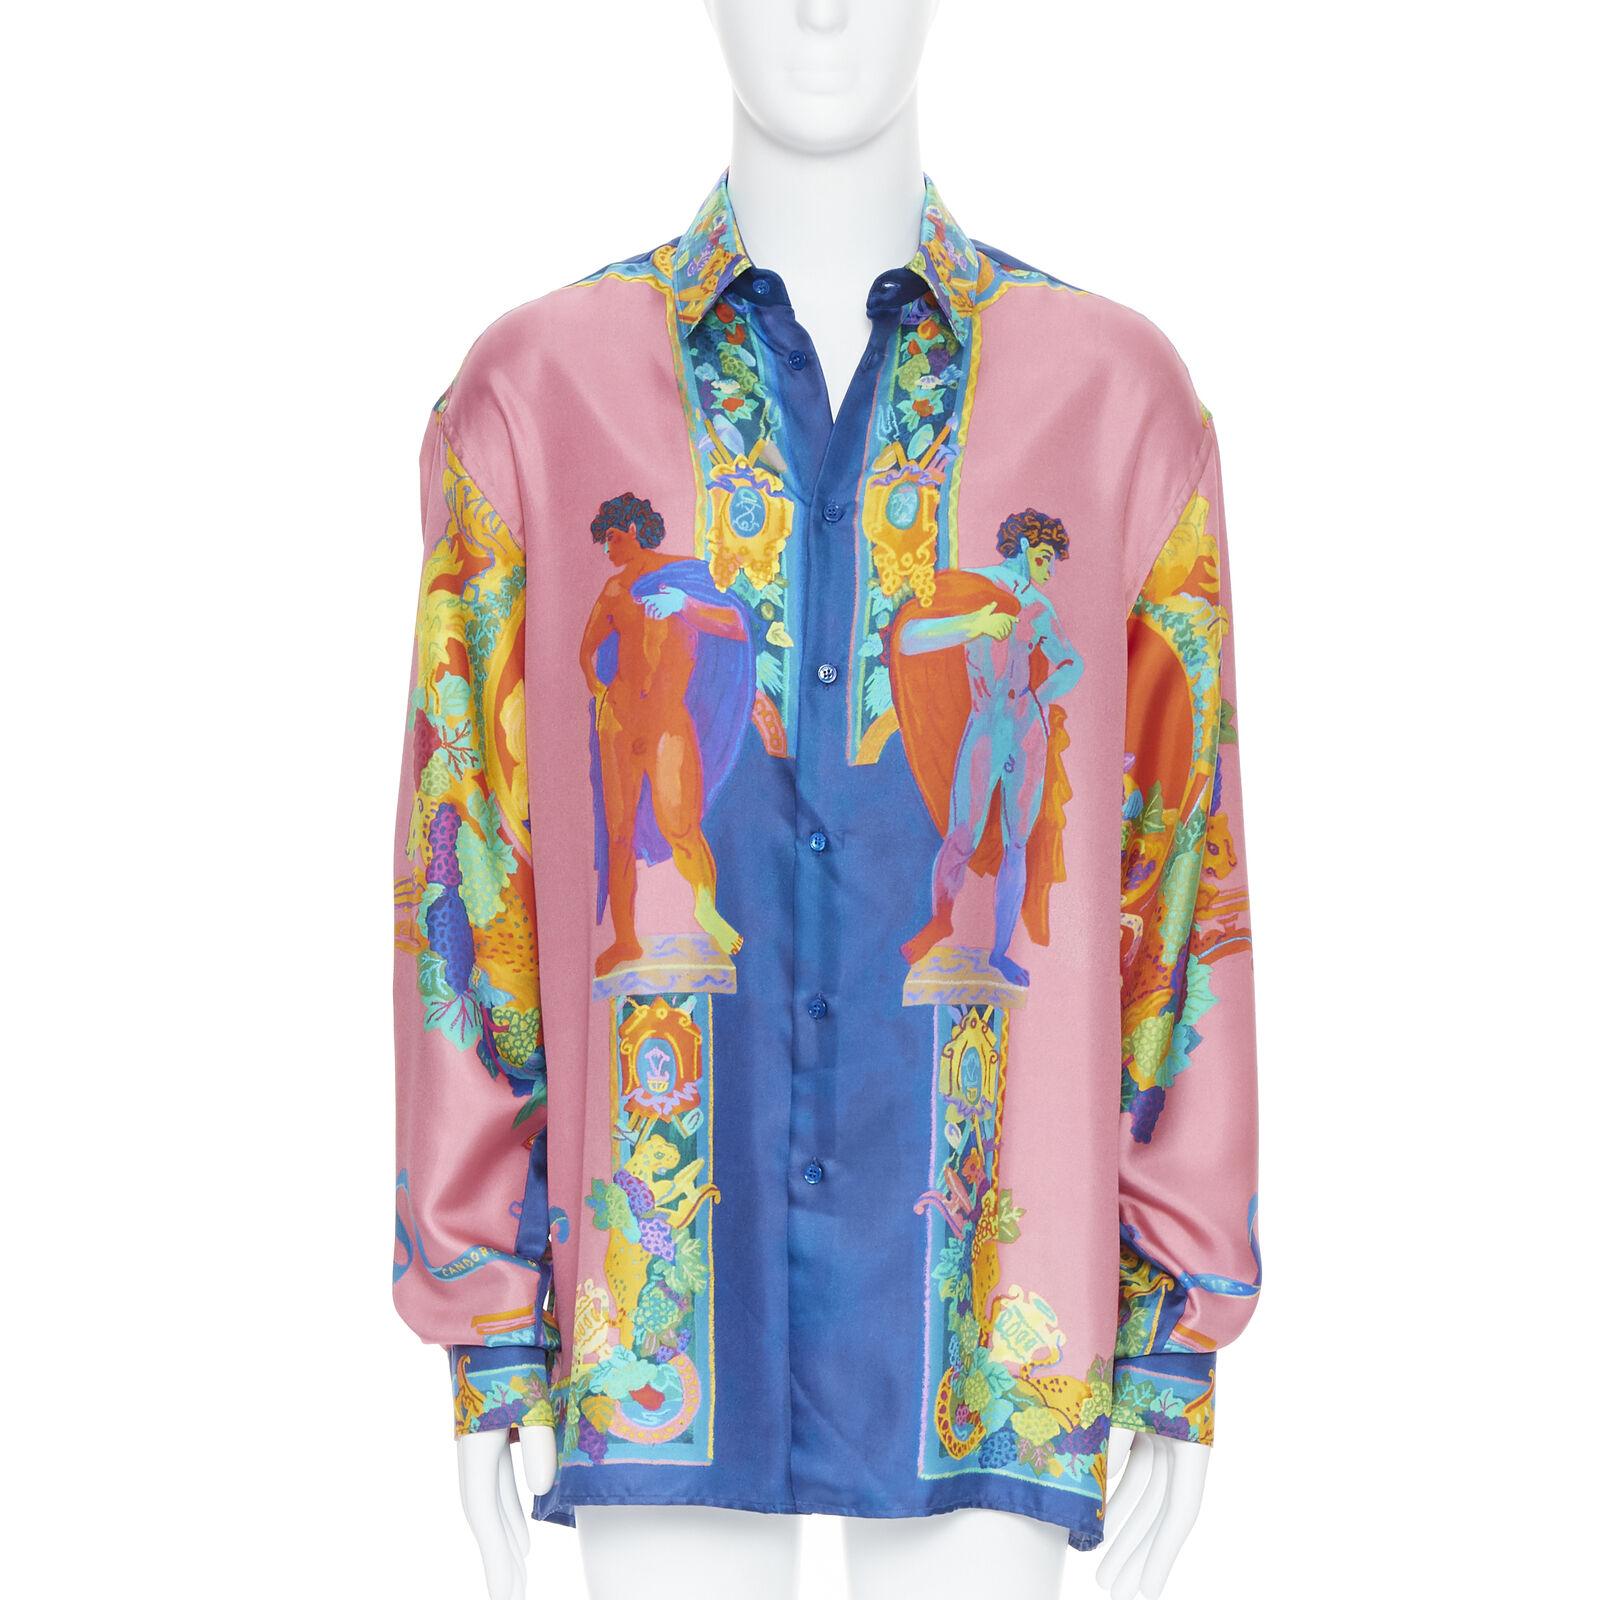 new VERSACE 2020 Runway Andy Dixon pink Grecian 100% silk shirt EU41
Reference: TGAS/B02104
Brand: Versace
Designer: Donatella Versace
Collection: 2020 Runway
Material: Silk
Color: Pink
Pattern: Abstract
Closure: Button
Extra Detail: In